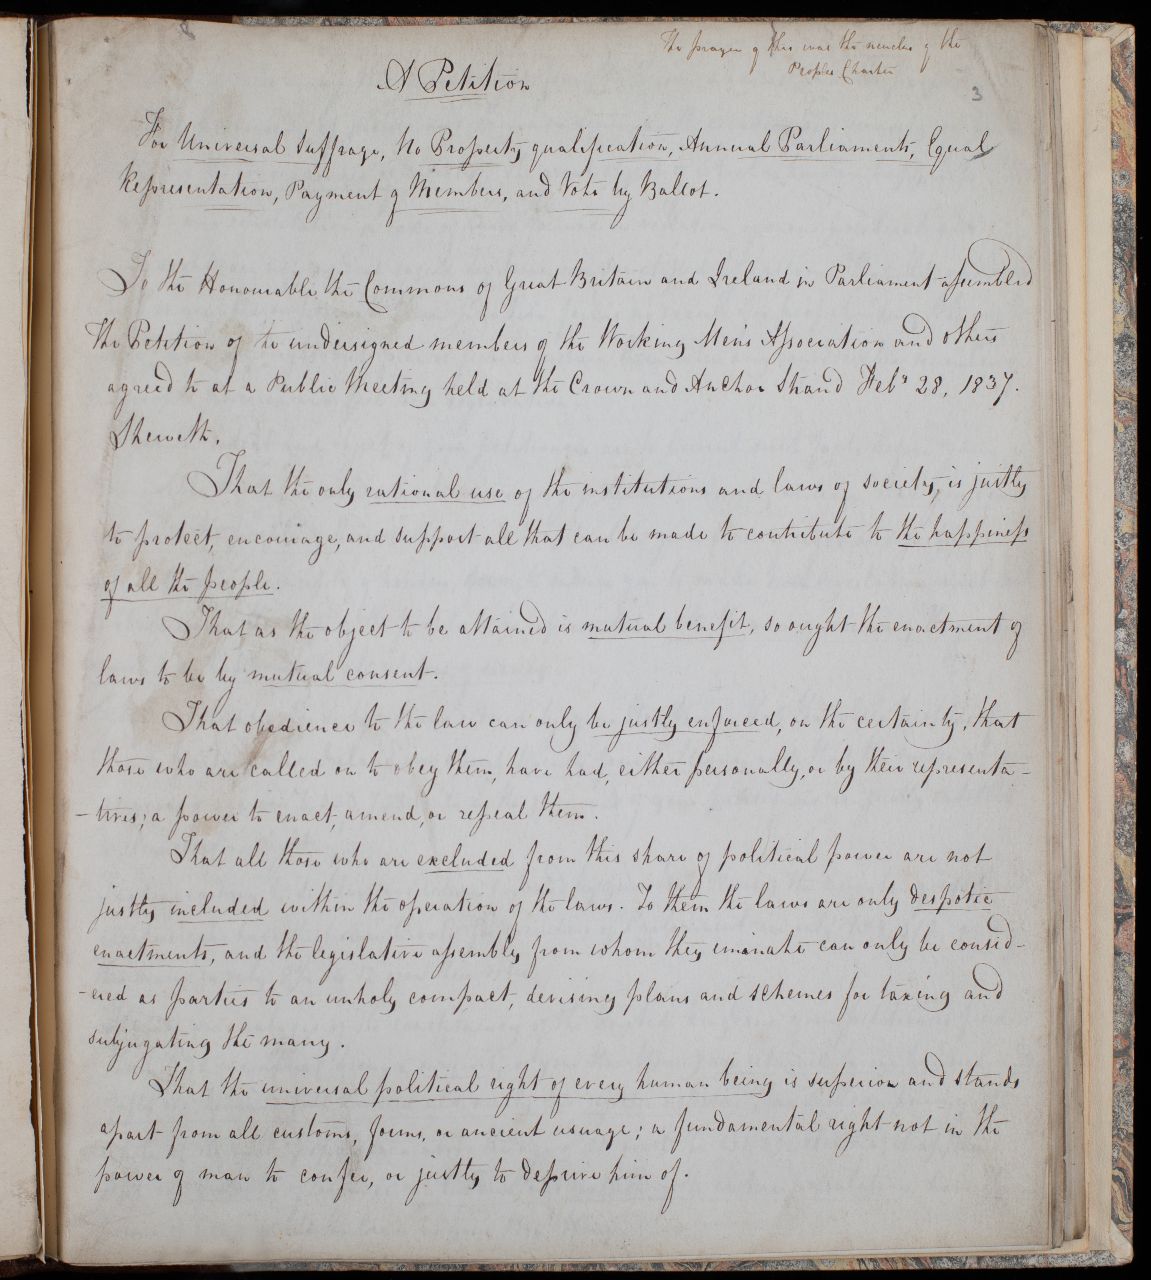 A handwritten page with the title "A petition".